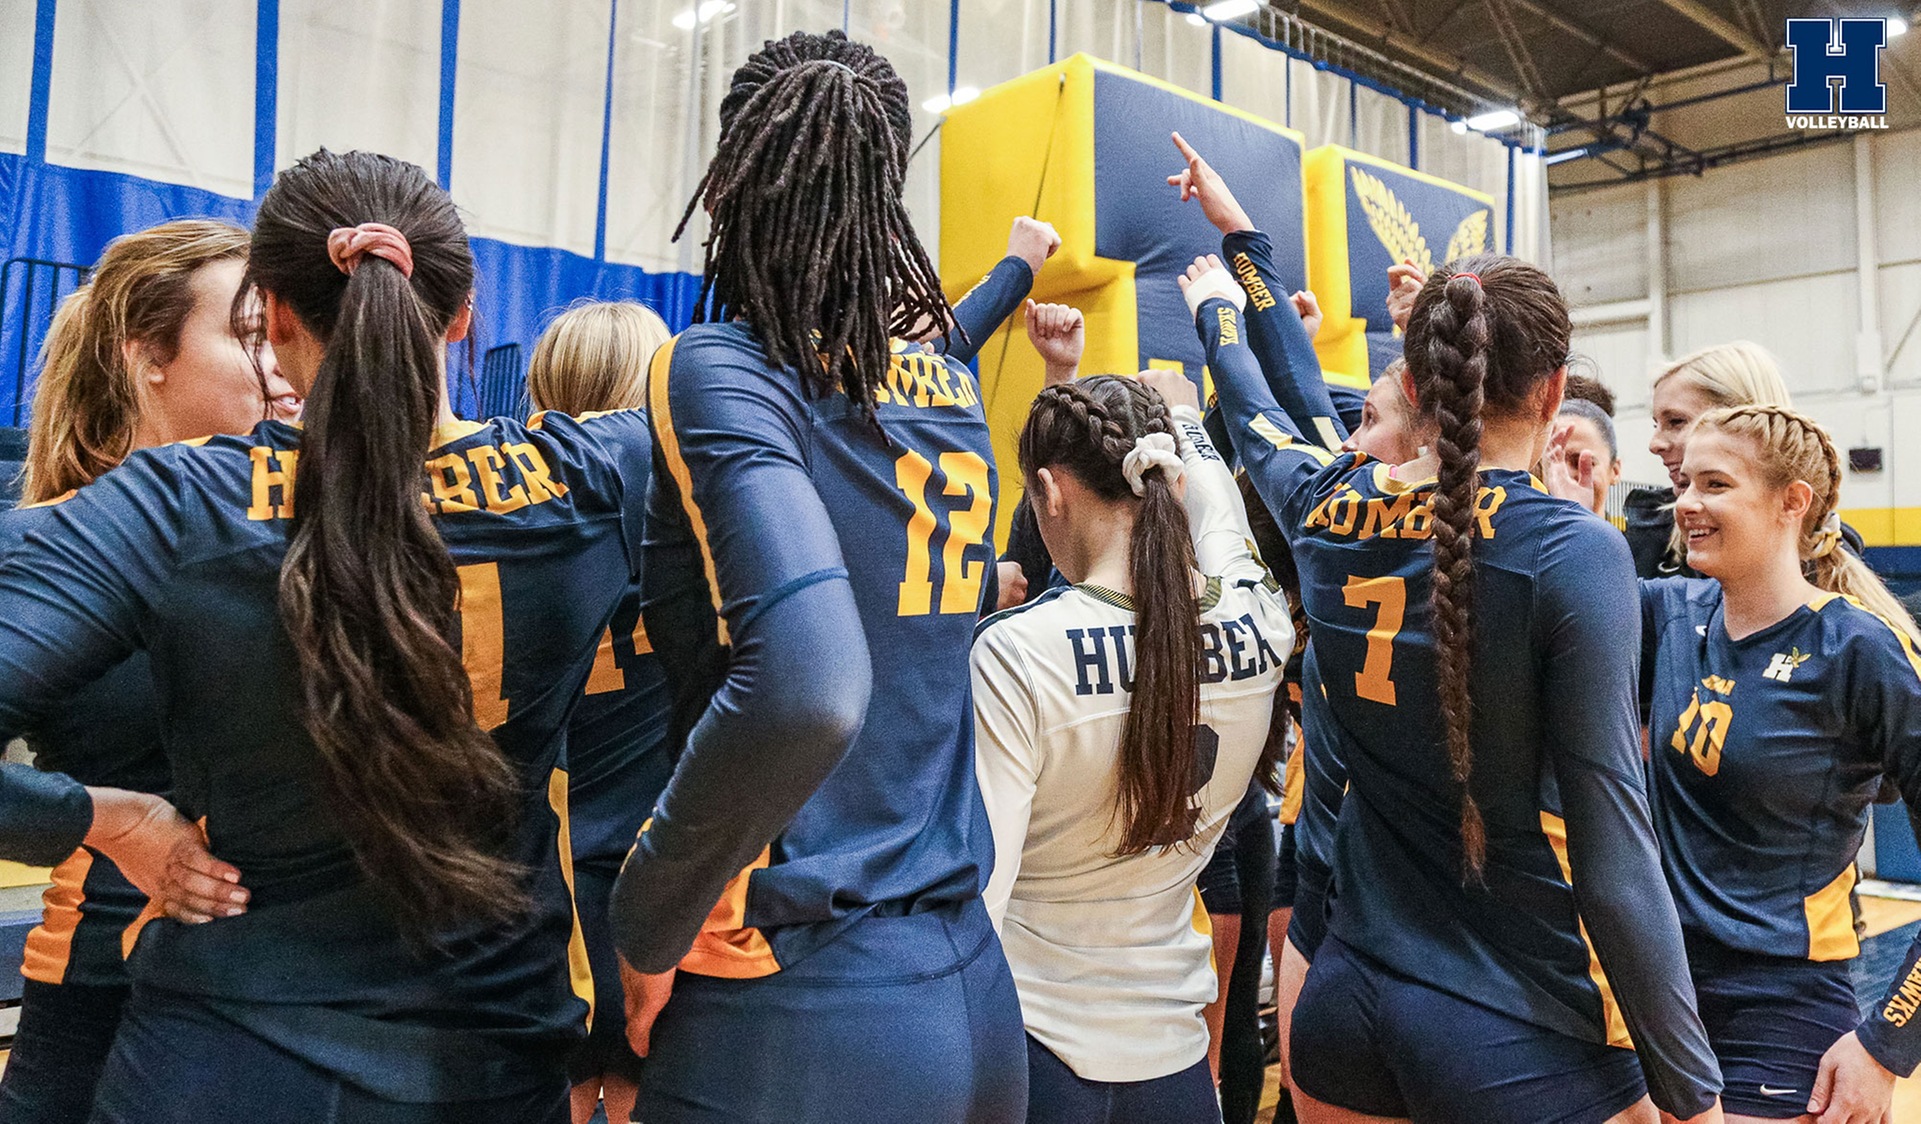 Five Humber Players Receive All-Ontario Honours at Annual OCAA Volleyball Banquet